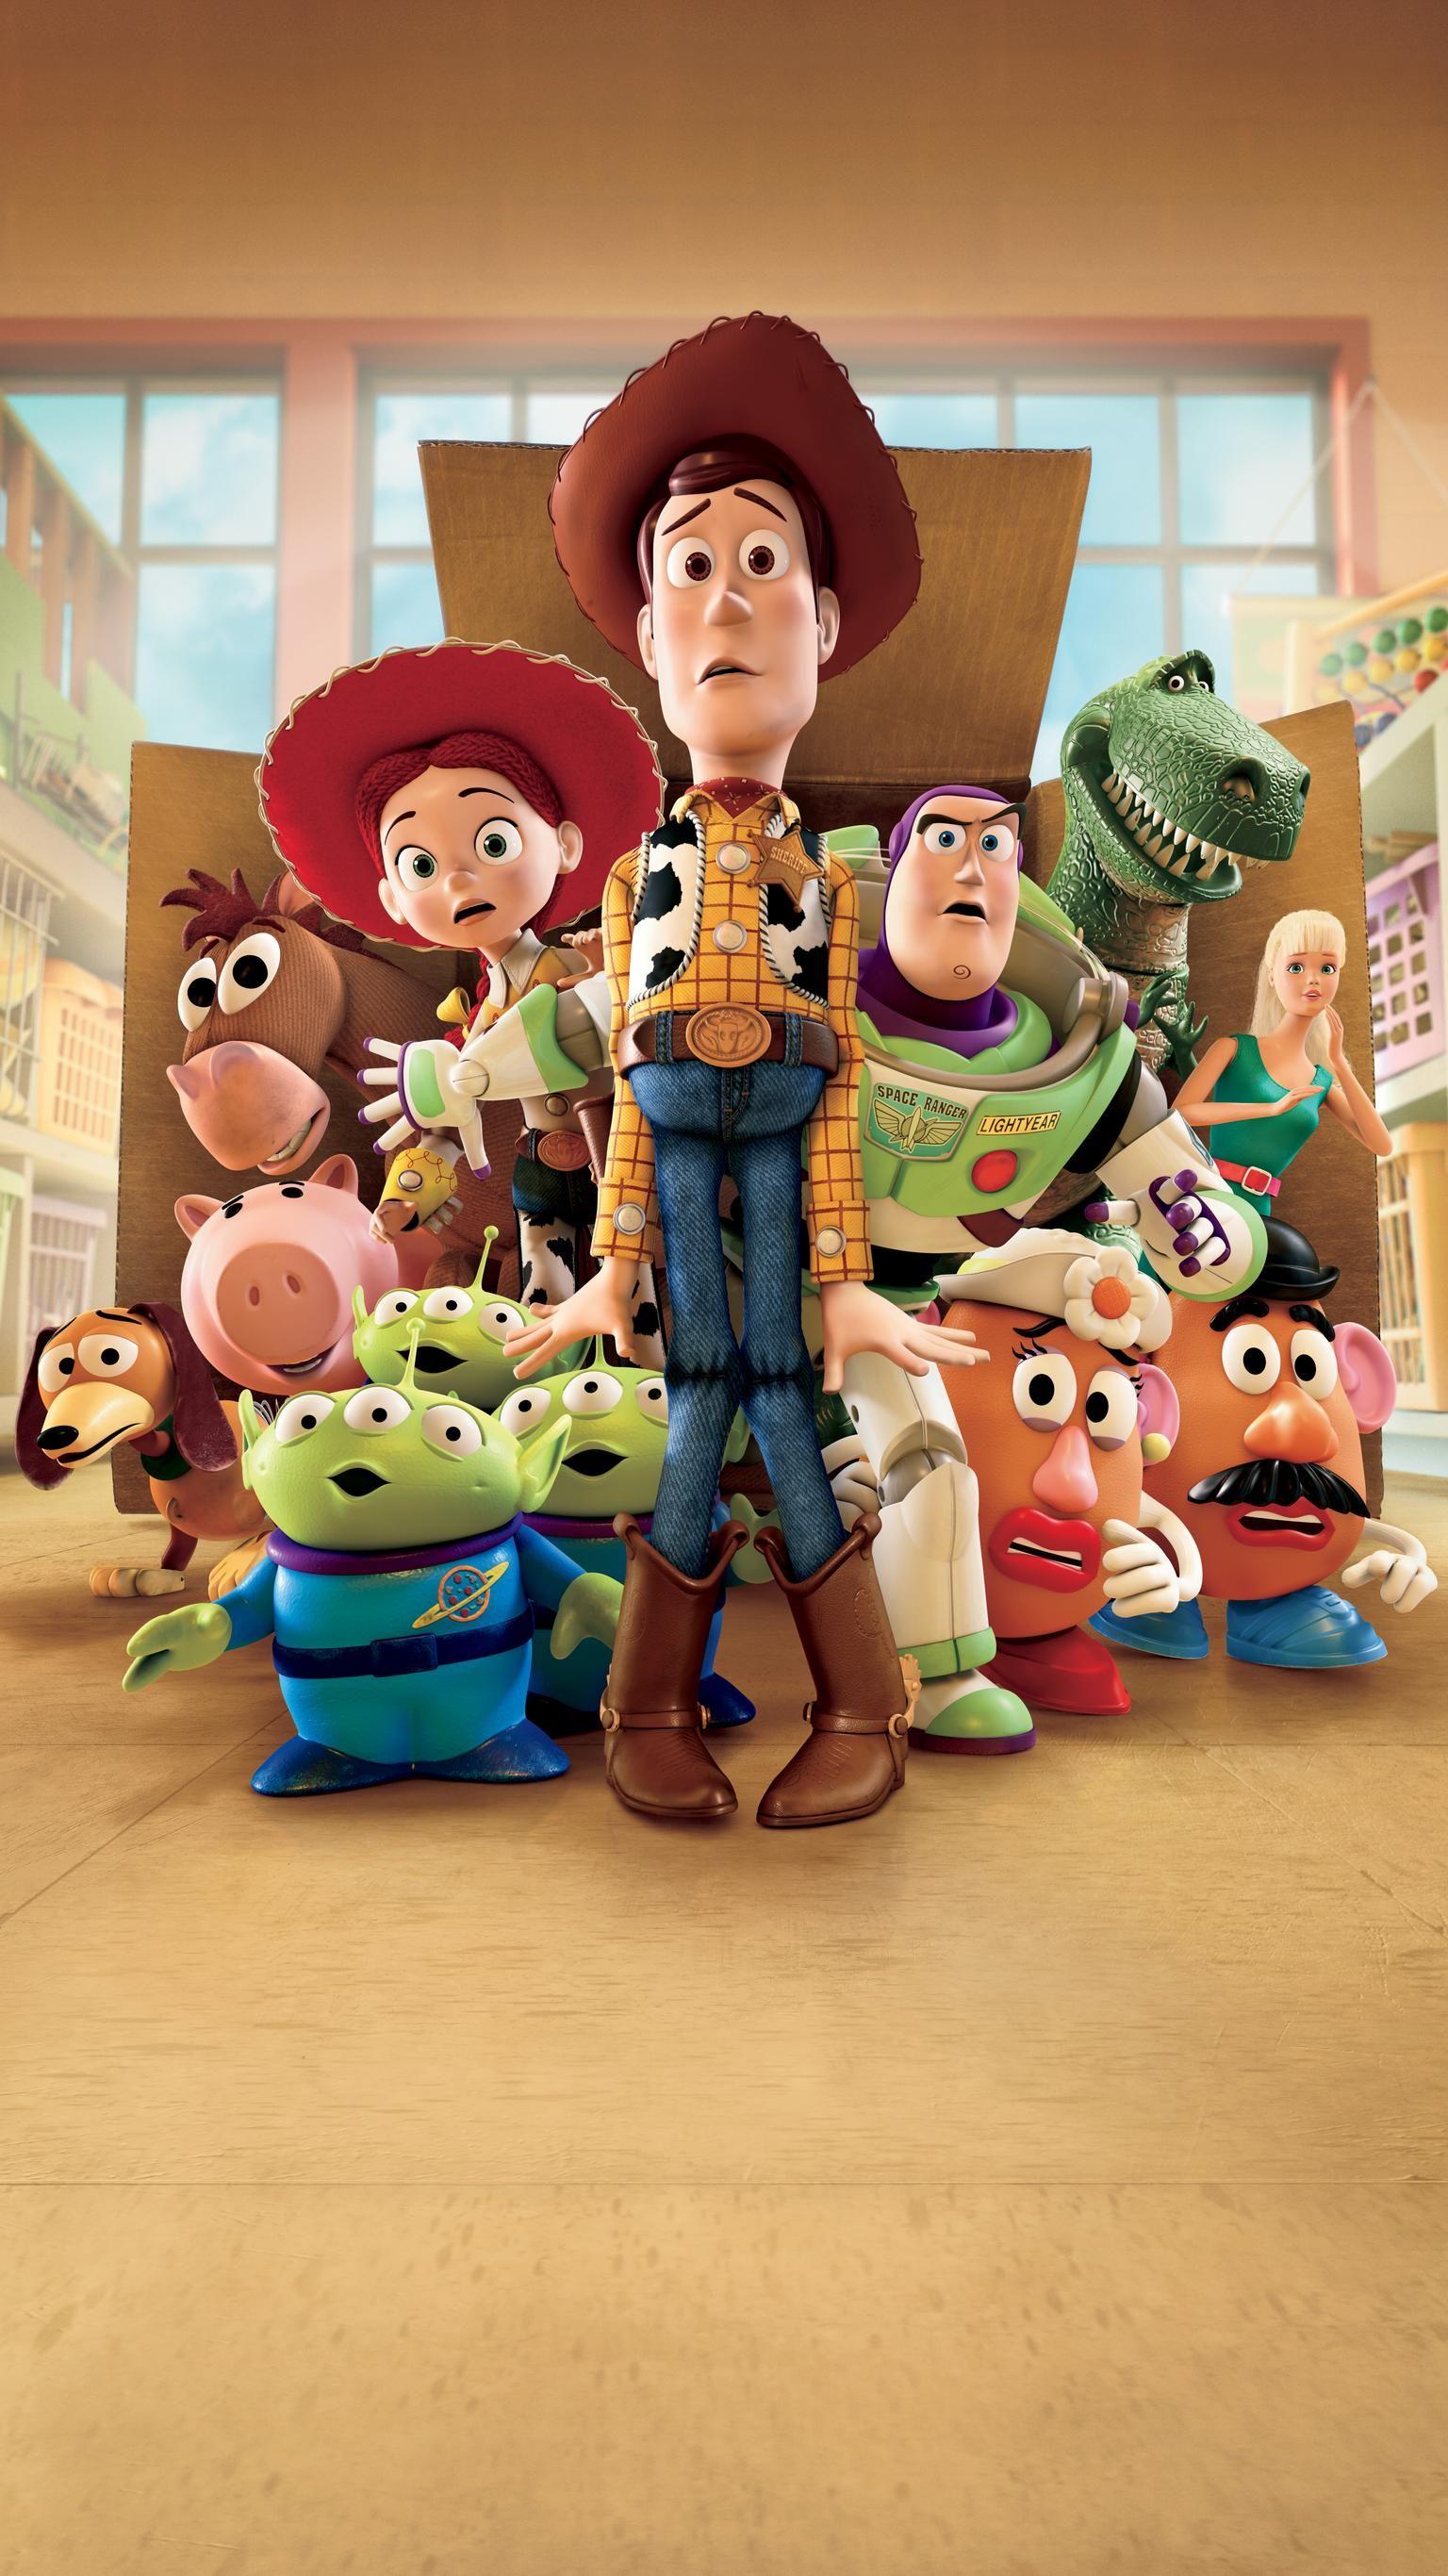 Toy Story 3 (2010) Phone Wallpaper. Pics. Toy story, Toy